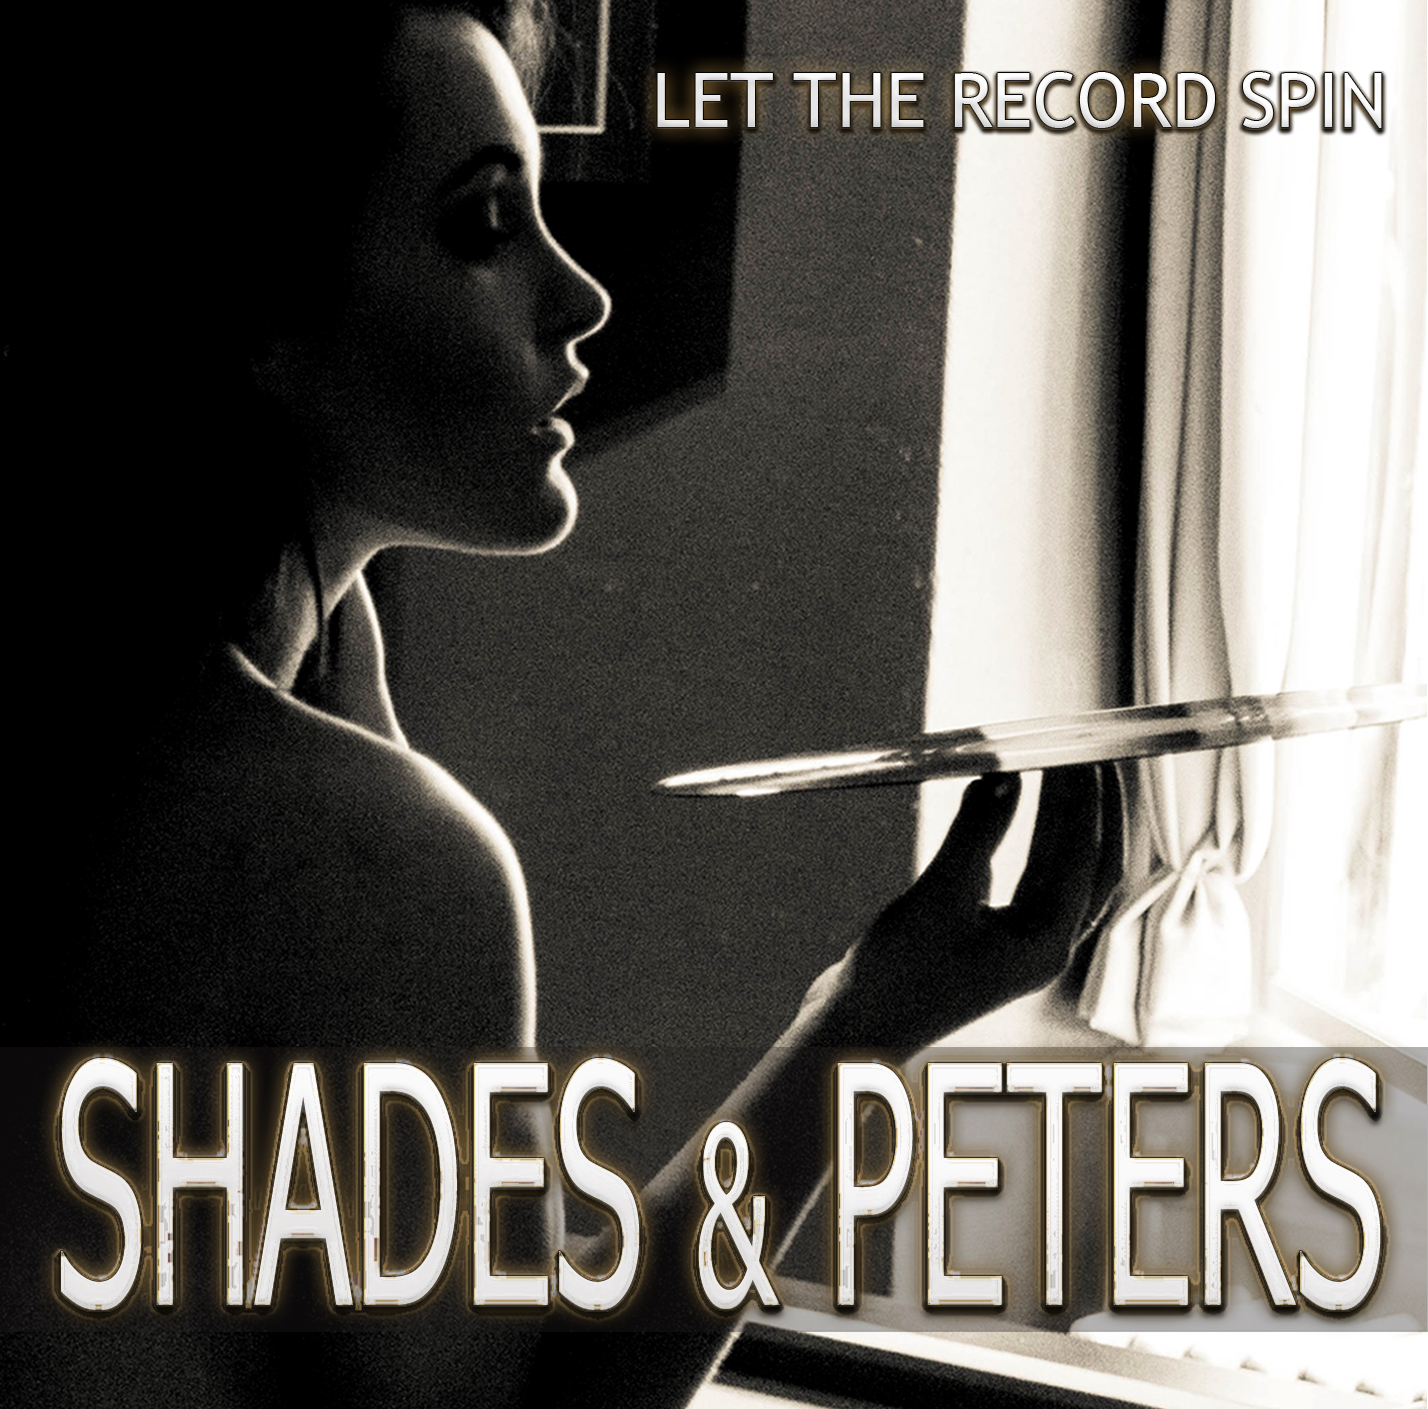 Shades And Peters : Let The Record Spin. Album Cover